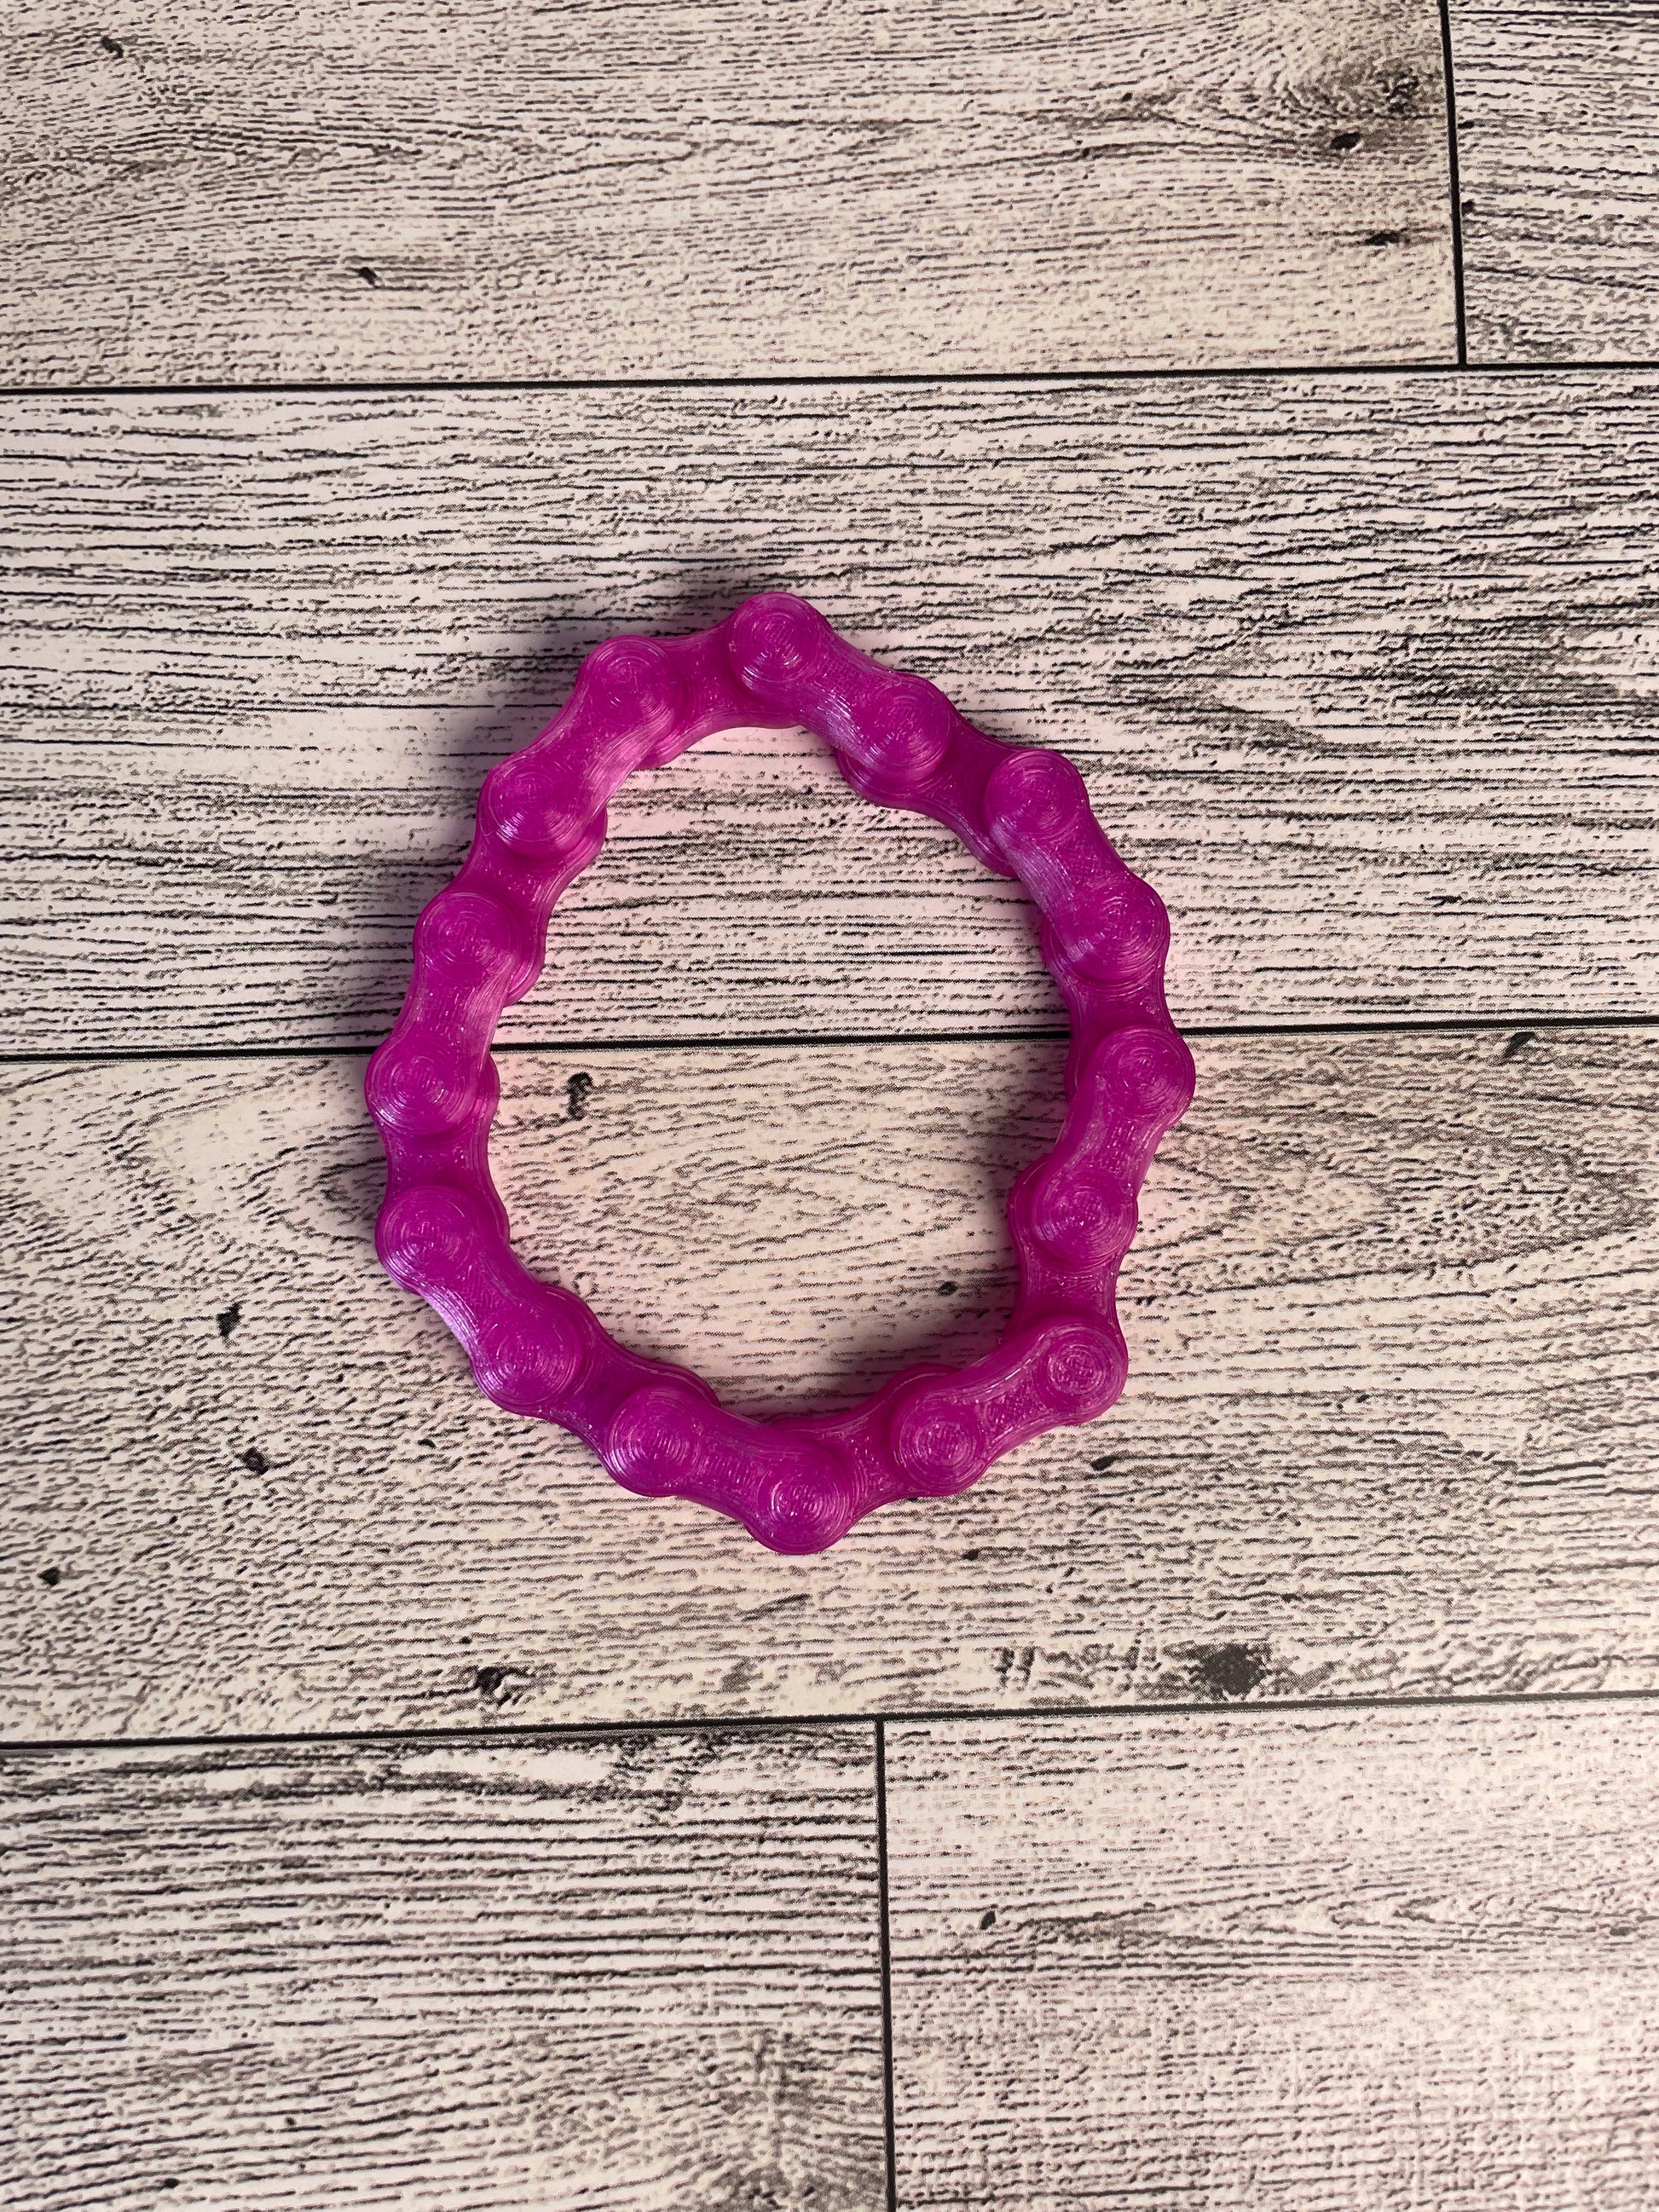 A translucent purple chain link on a wood backdrop. The chain is arranged in a circle shape and there are eight links.